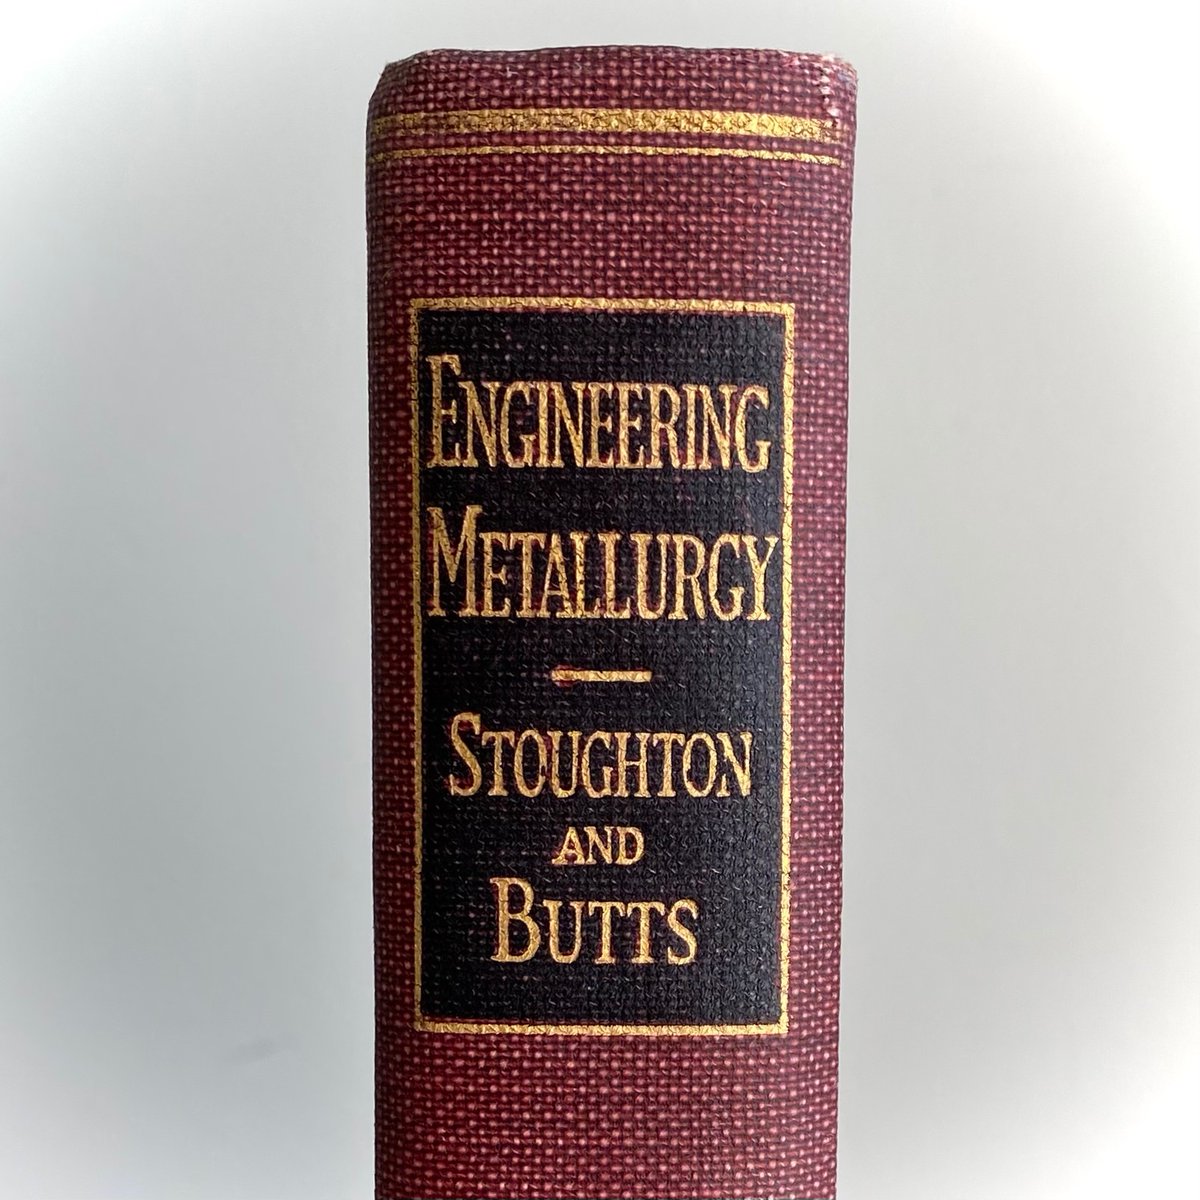 Vintage textbook up! From 1938, Engineering Metallurgy. 

bookmosaic.etsy.com/listing/170693…